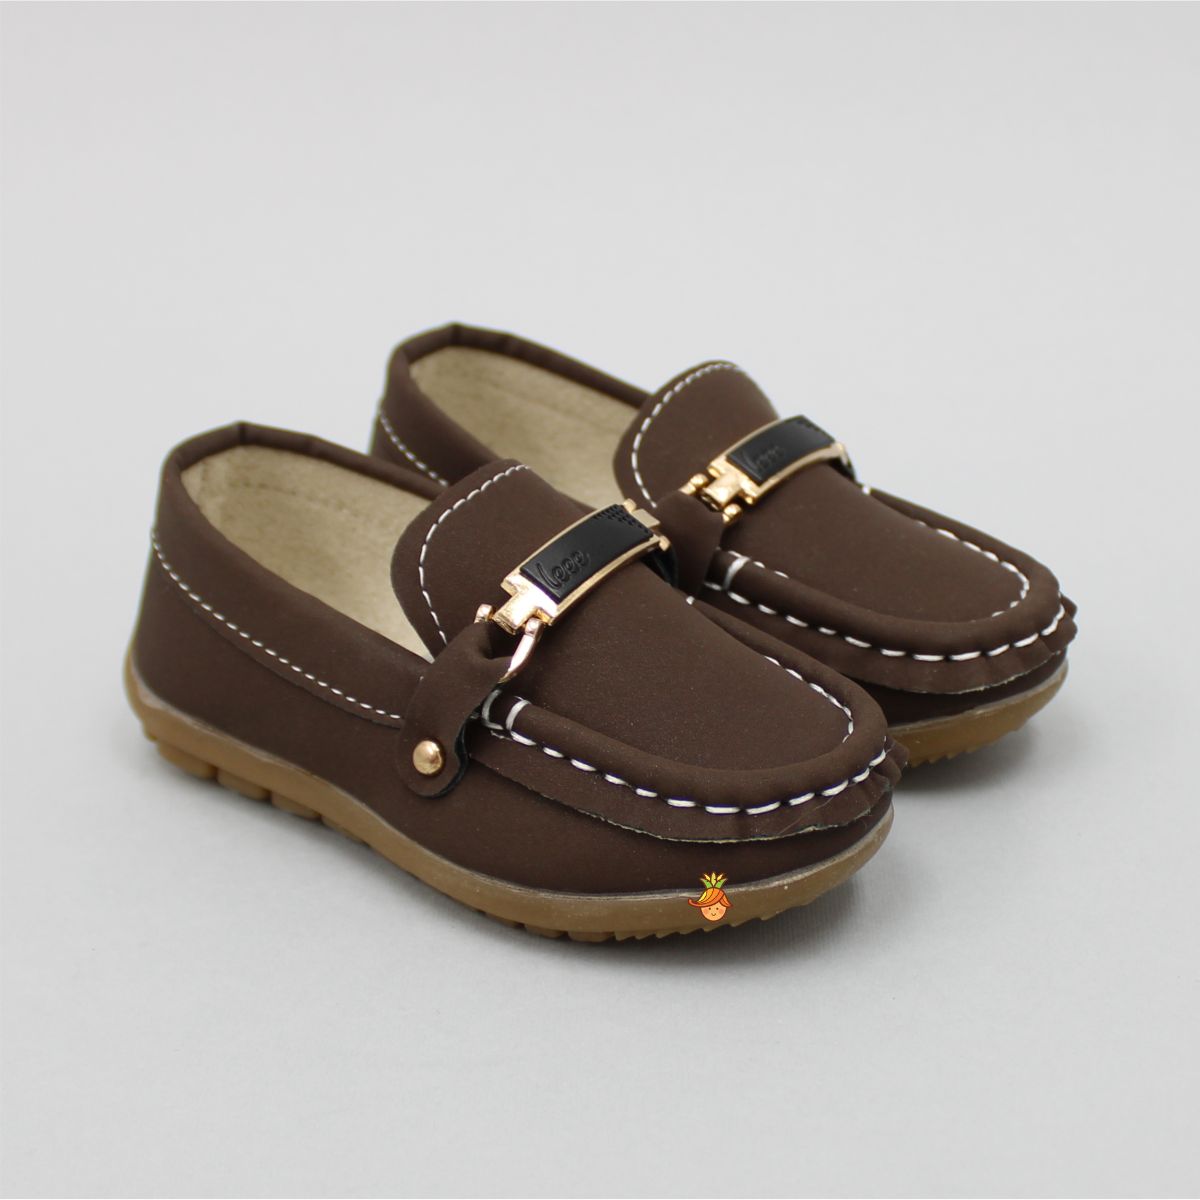 Round Toe Brown Loafers